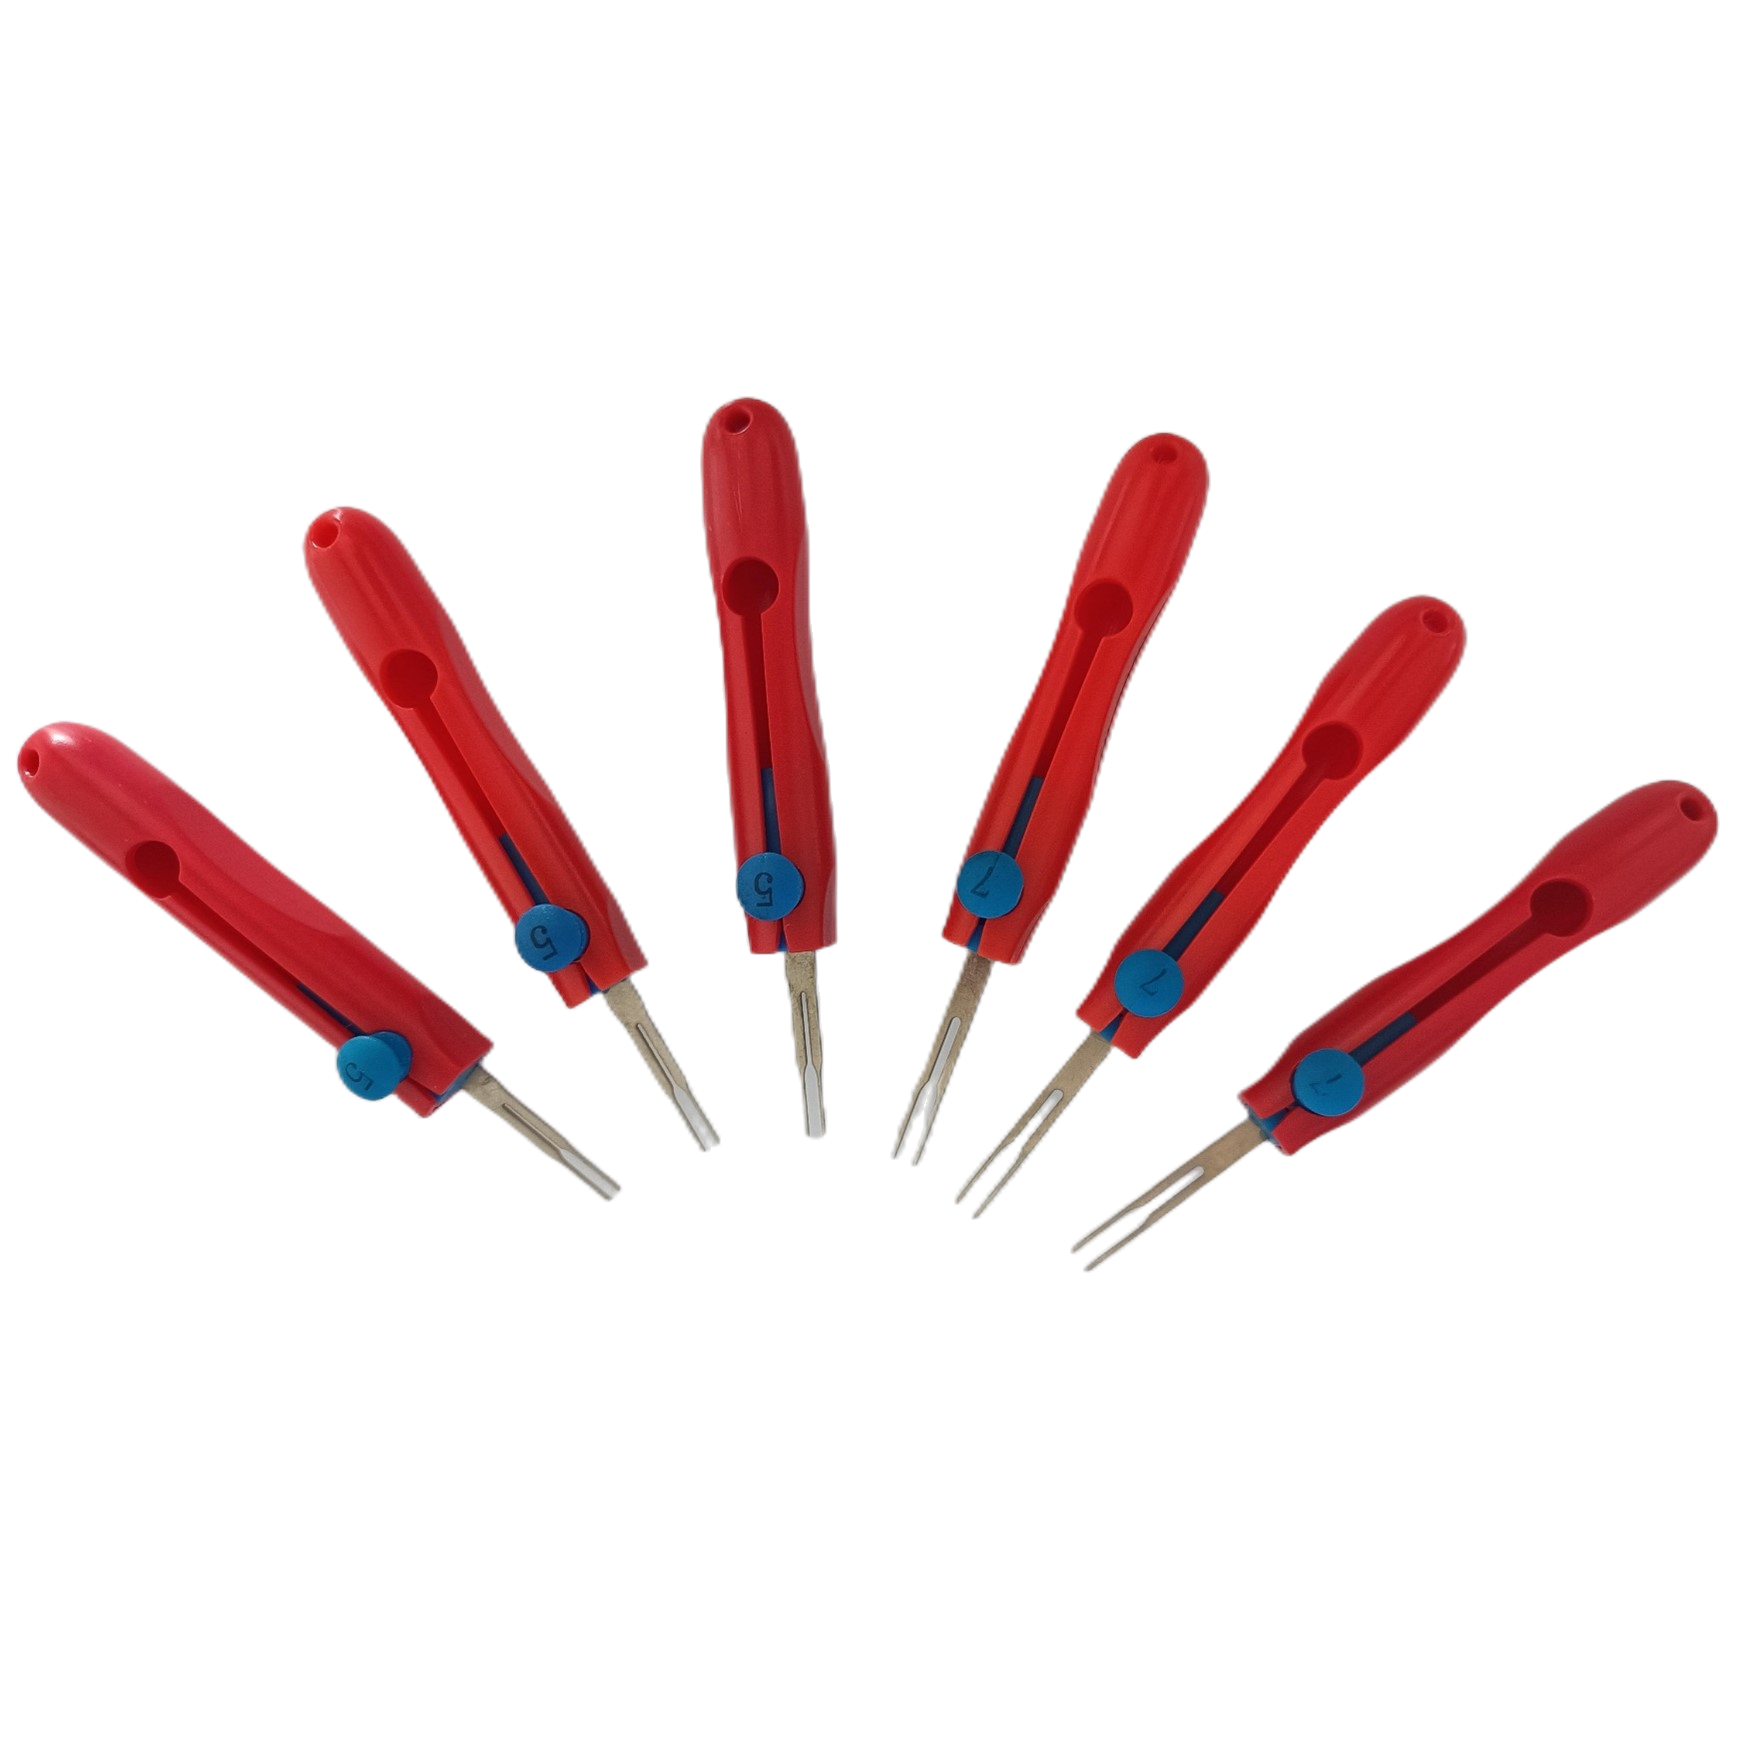 Terminal Removal Tools: Essential Equipment for Efficient Repairing and Reworking at OEM and after-market in the Car Wiring Harness Industry